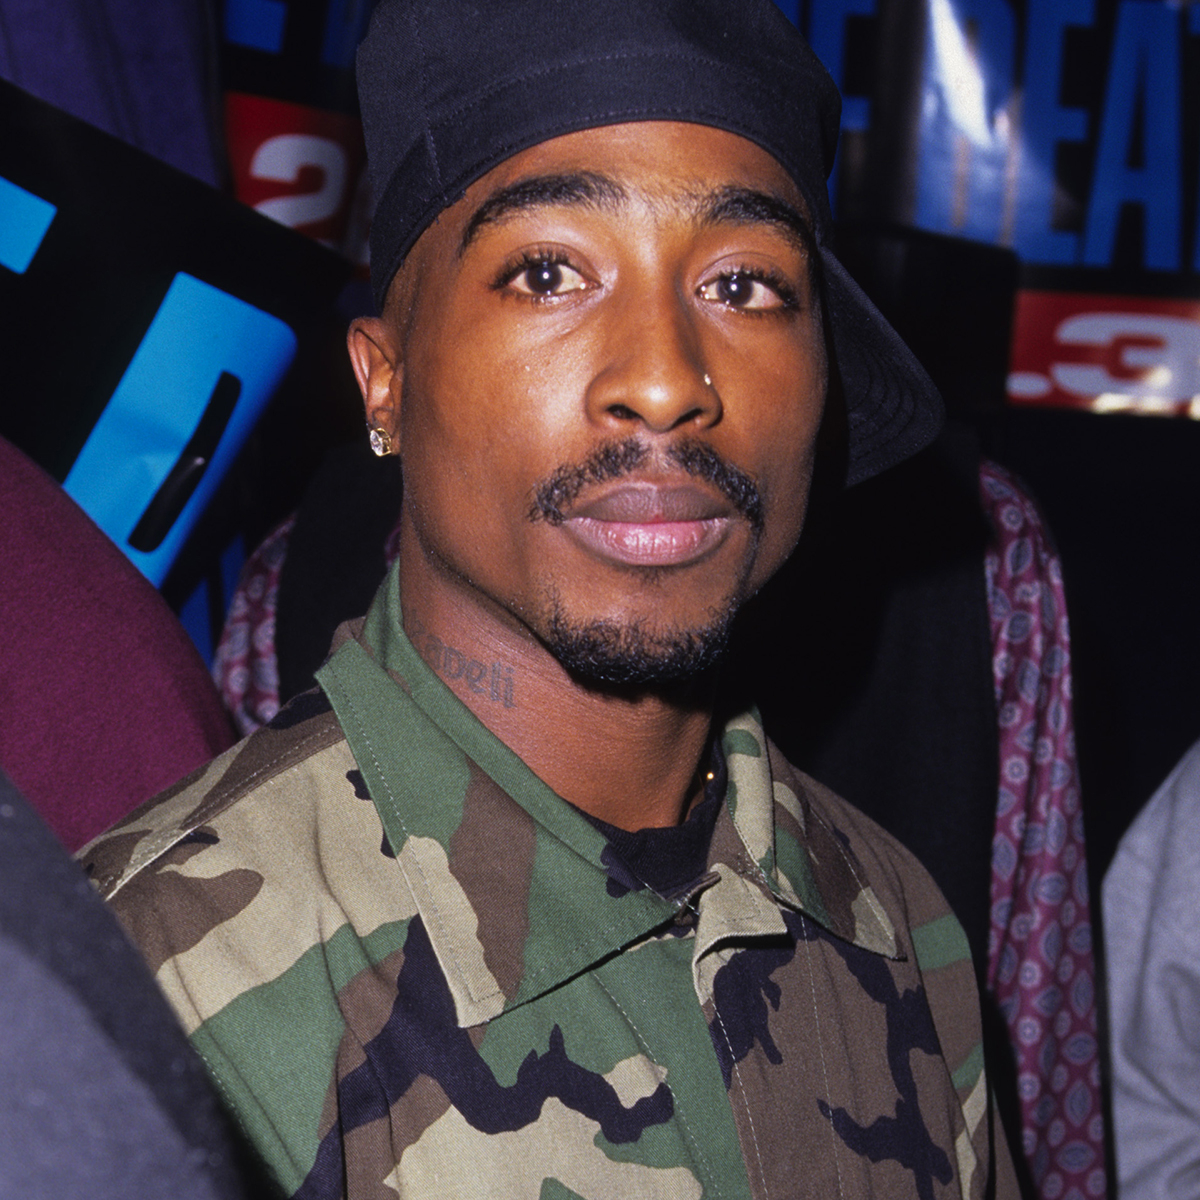 Tupac Shakur Death Case: Duane Keith Davis Charged With Murder